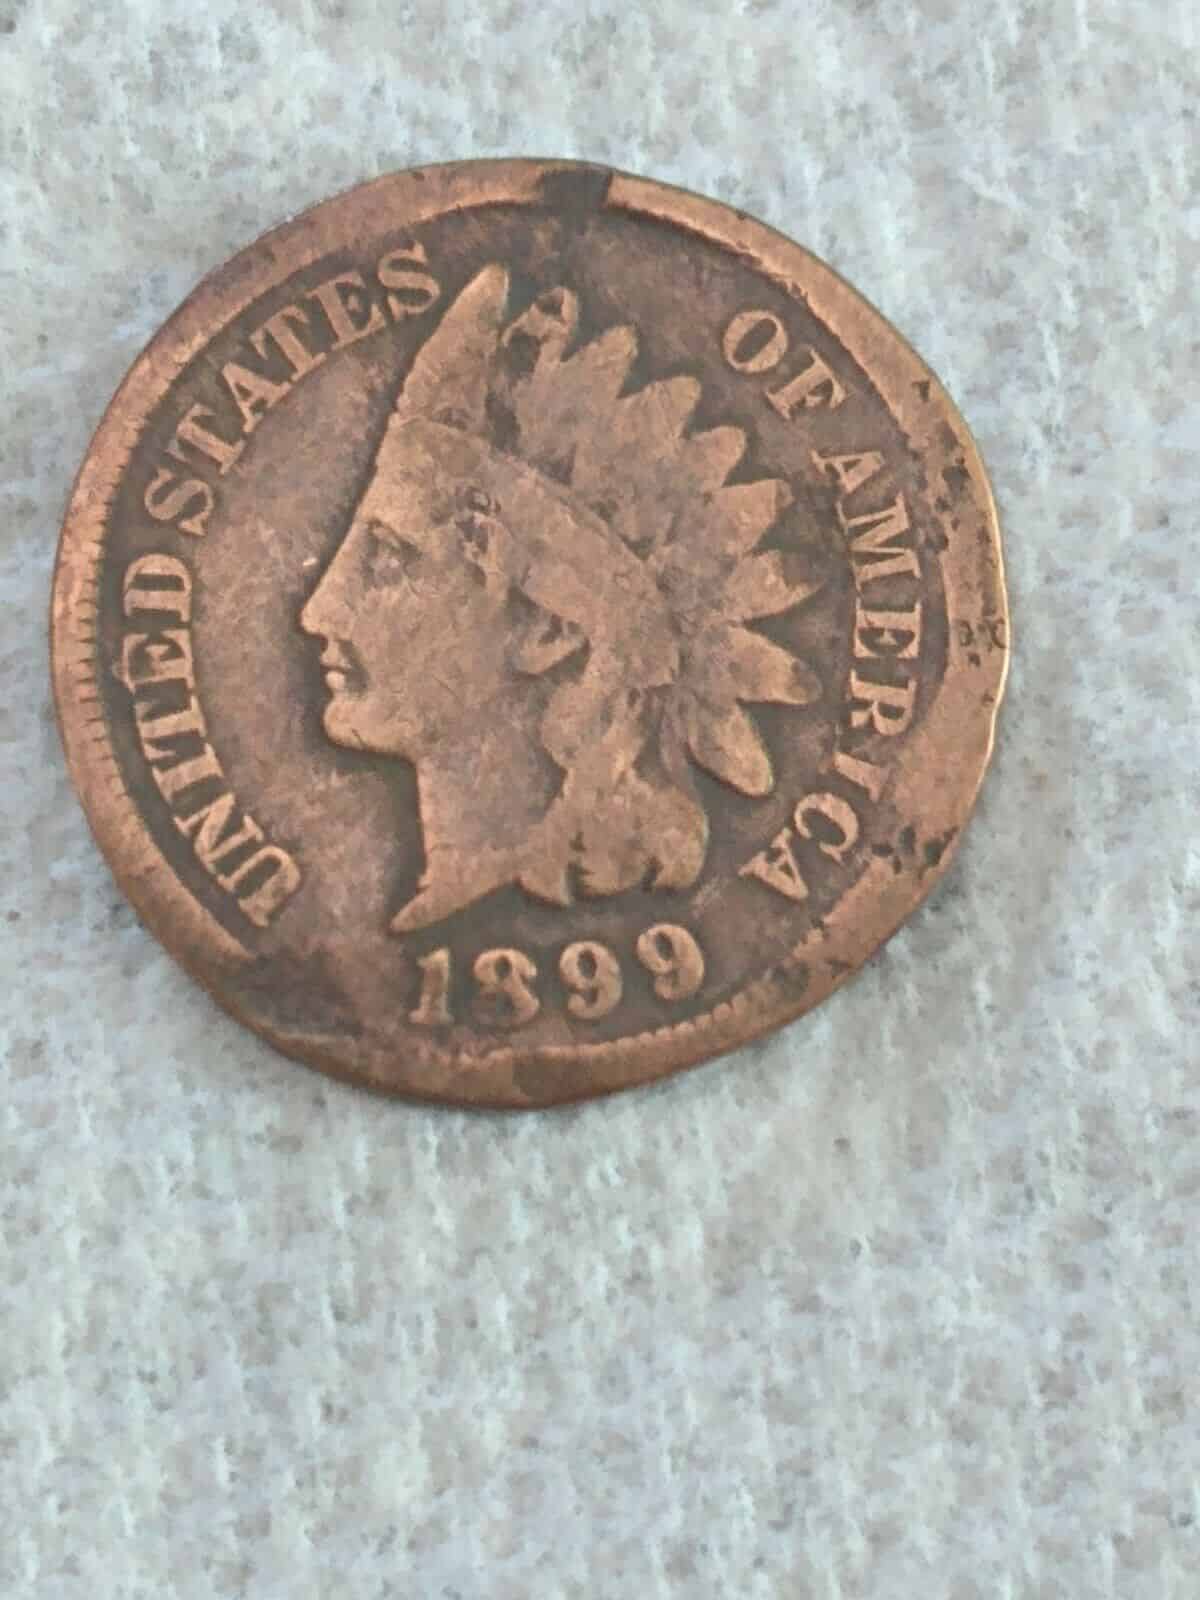 1899 Indian Head Penny Variations